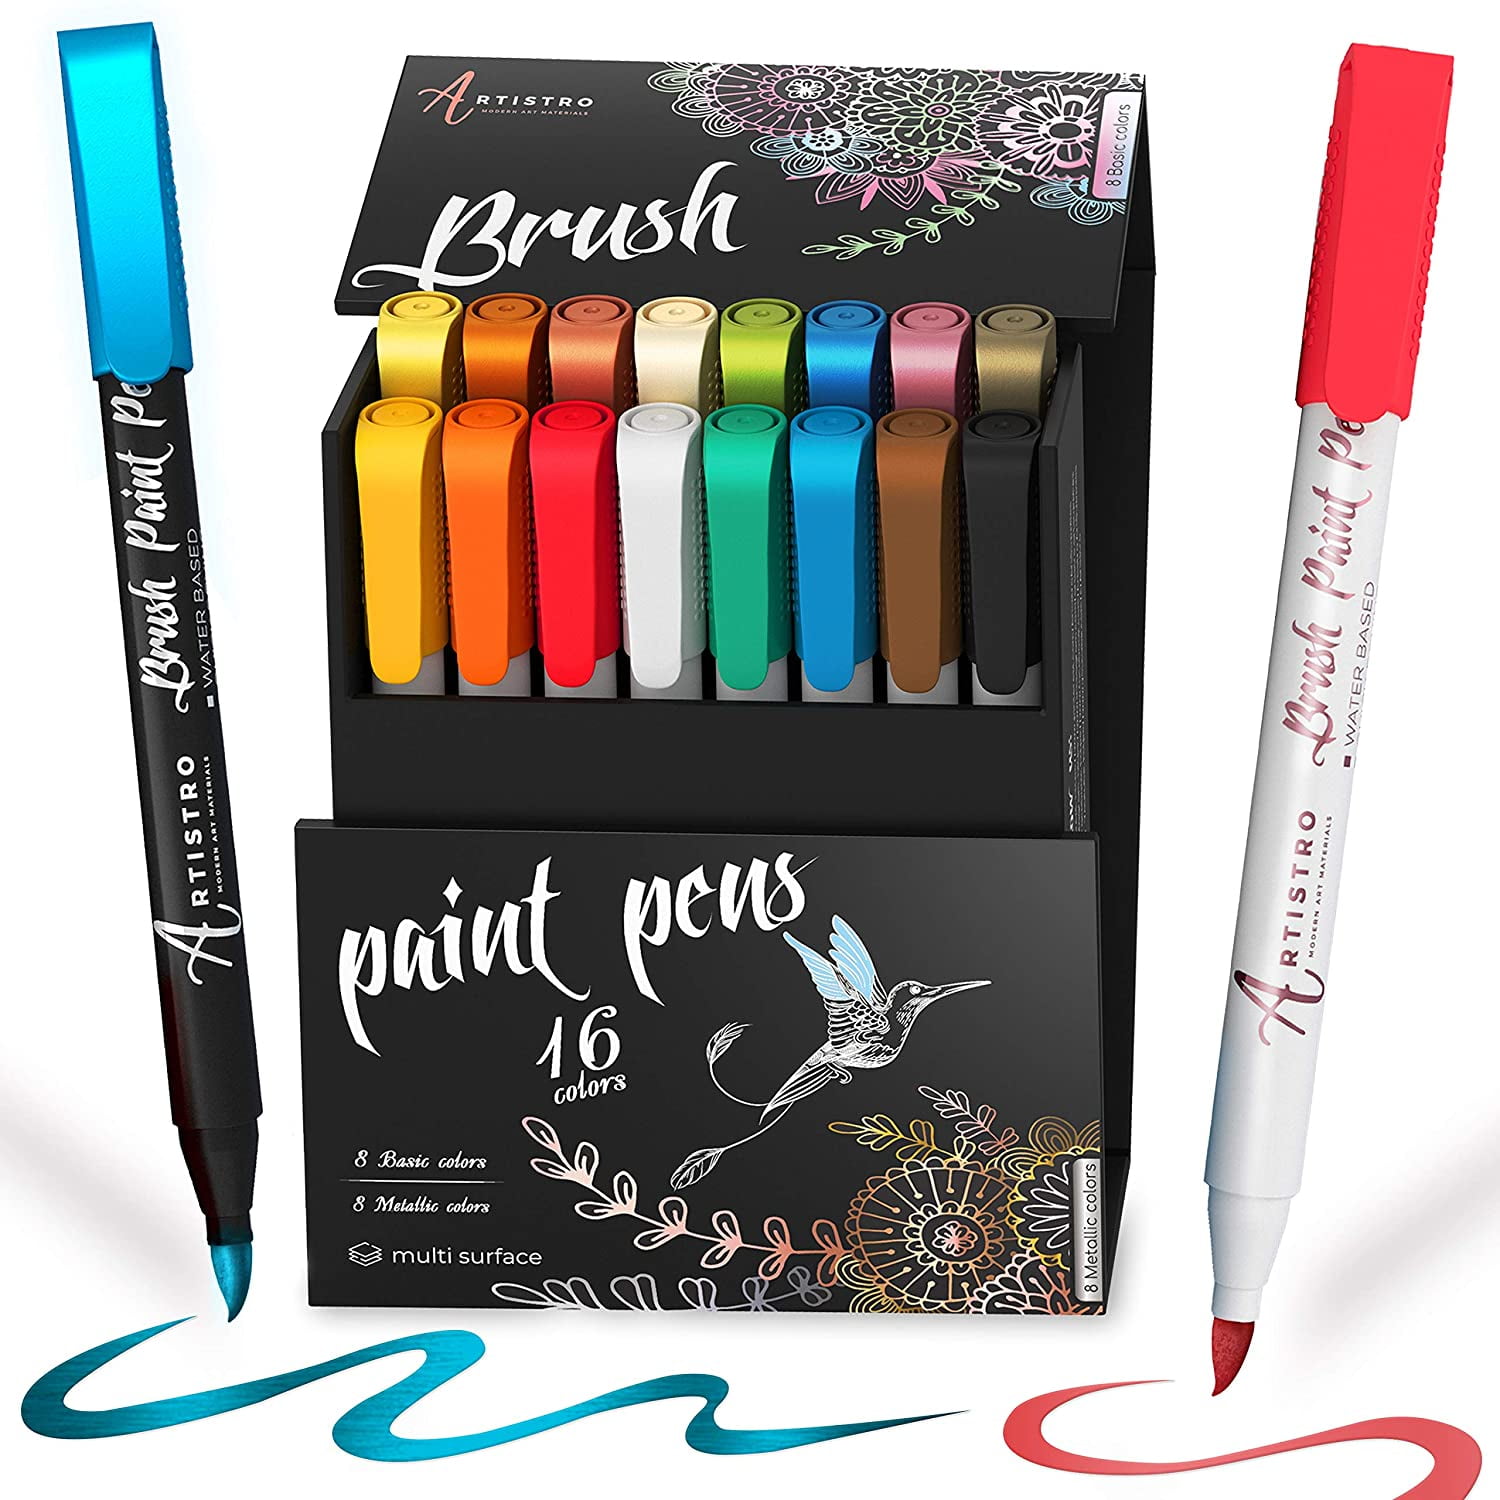 Art Pens and Markers For Drawing - Oytra Tagged Colors